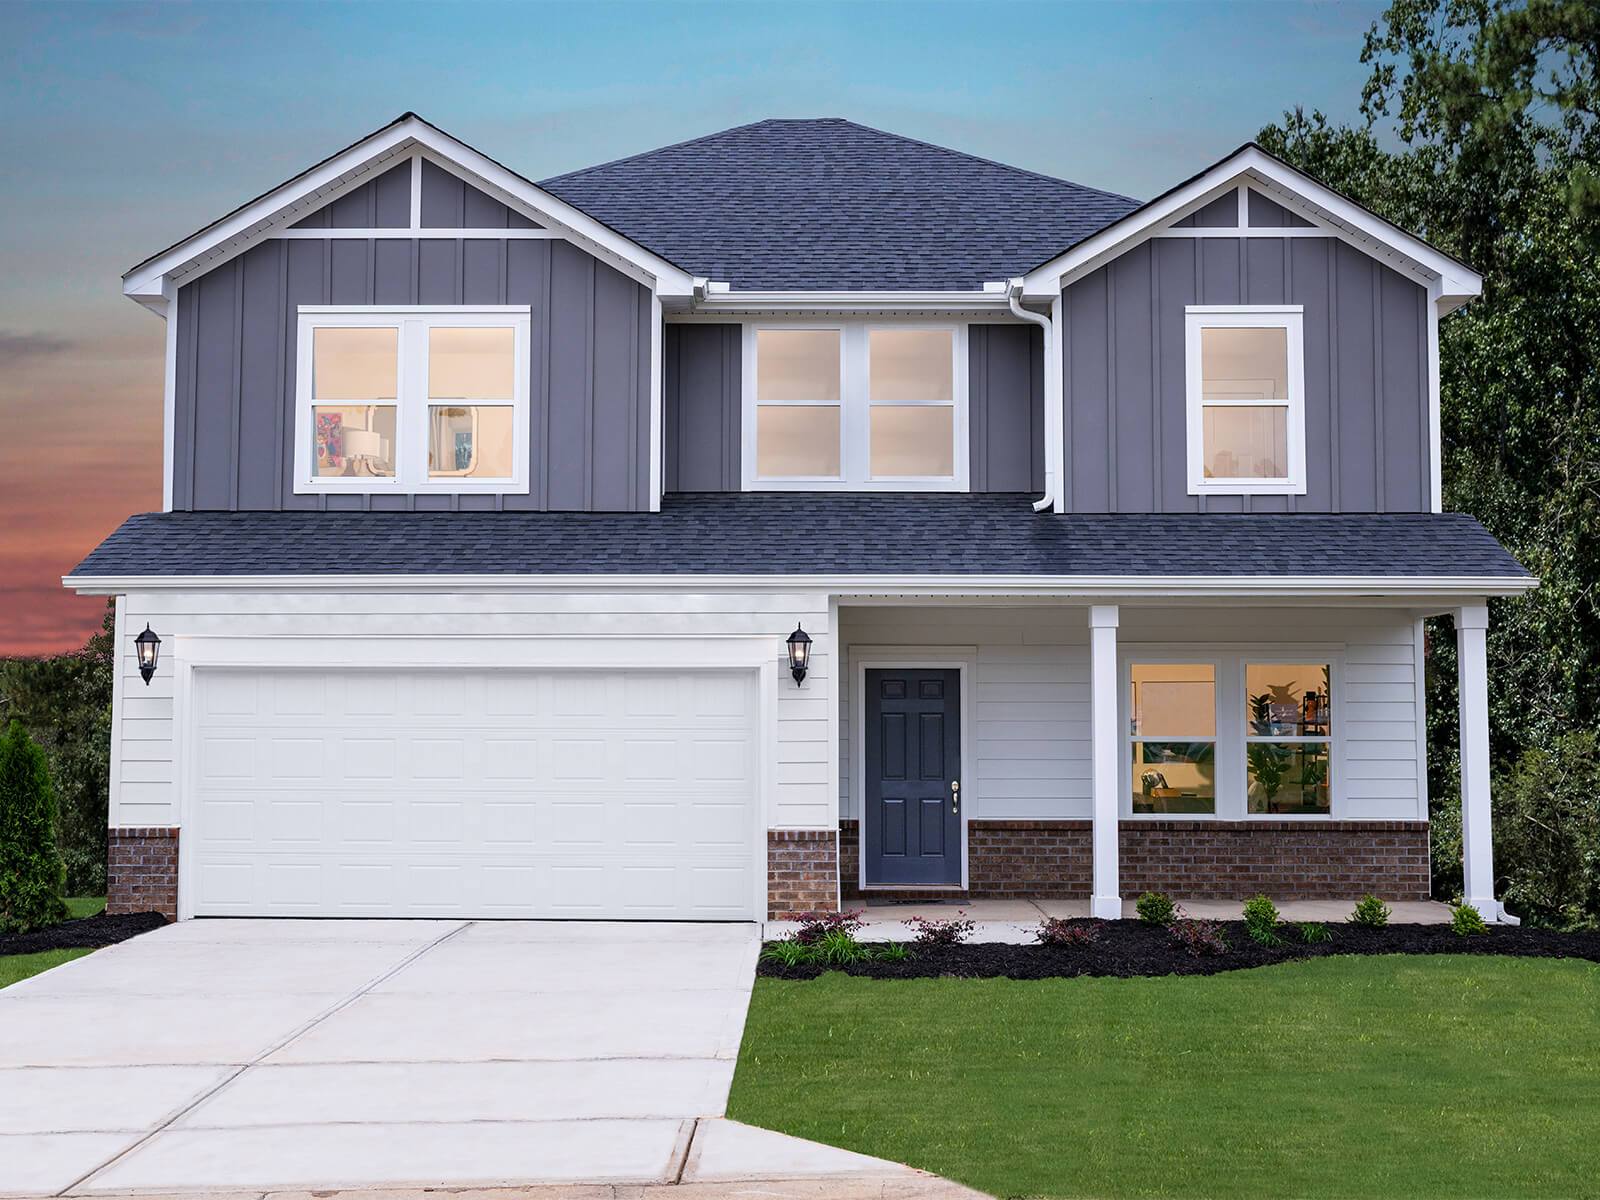 Welcome to the Brentwood Model at Reserve at Arden Woods.